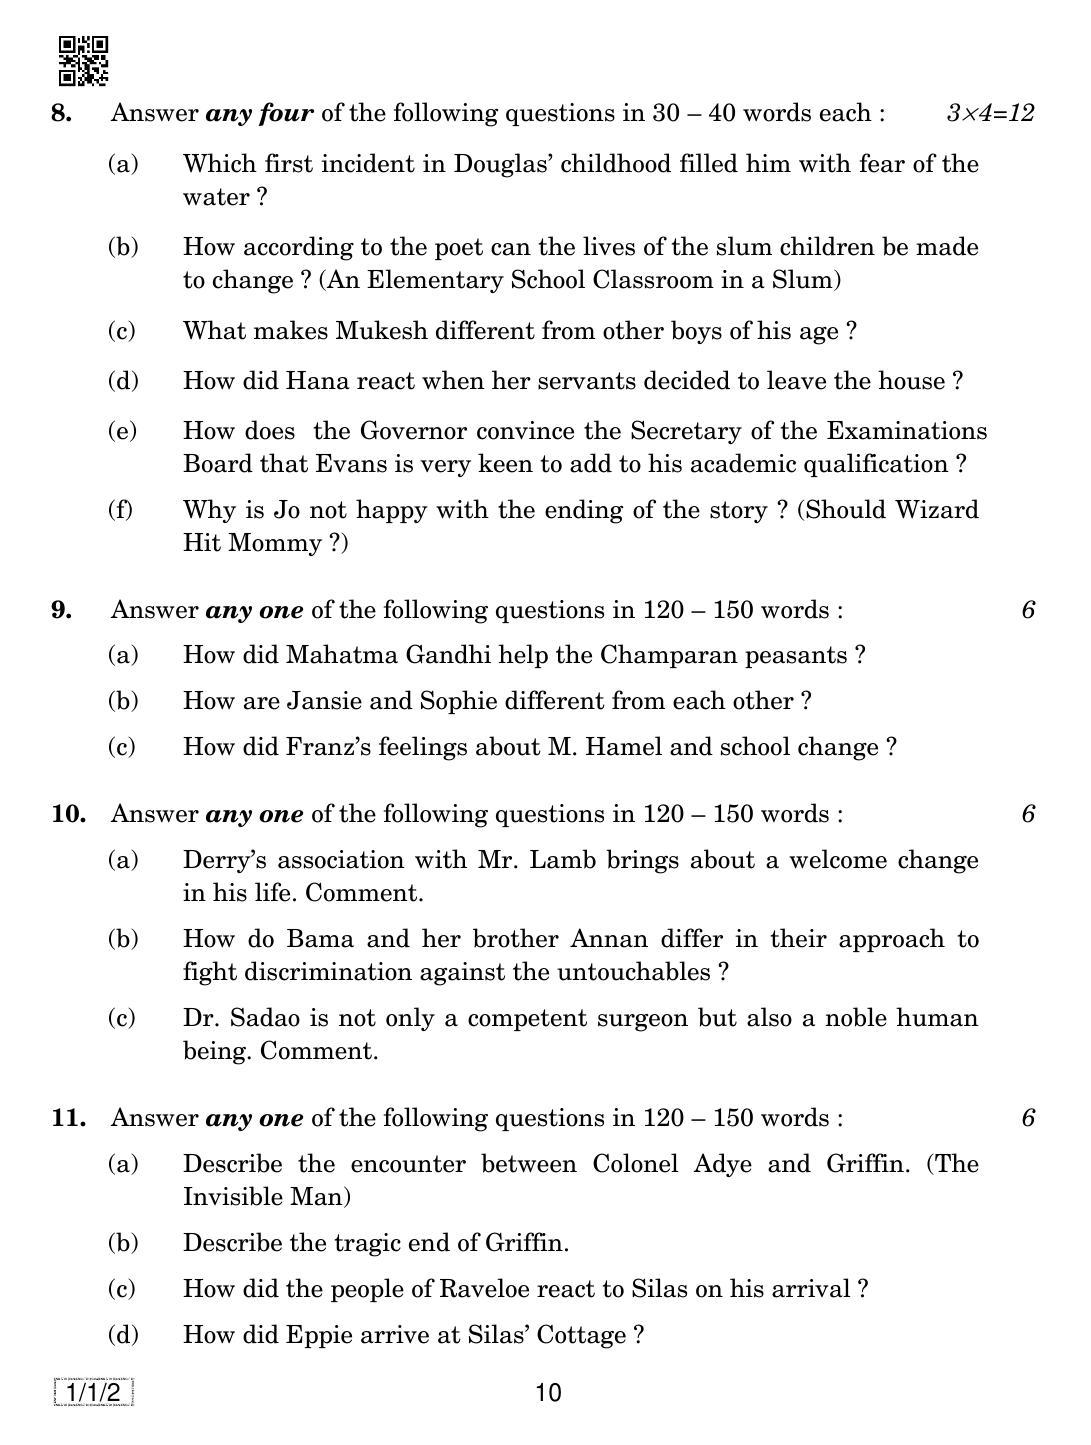 CBSE Class 12 1-1-2 ENGLISH CORE 2019 Compartment Question Paper - Page 10